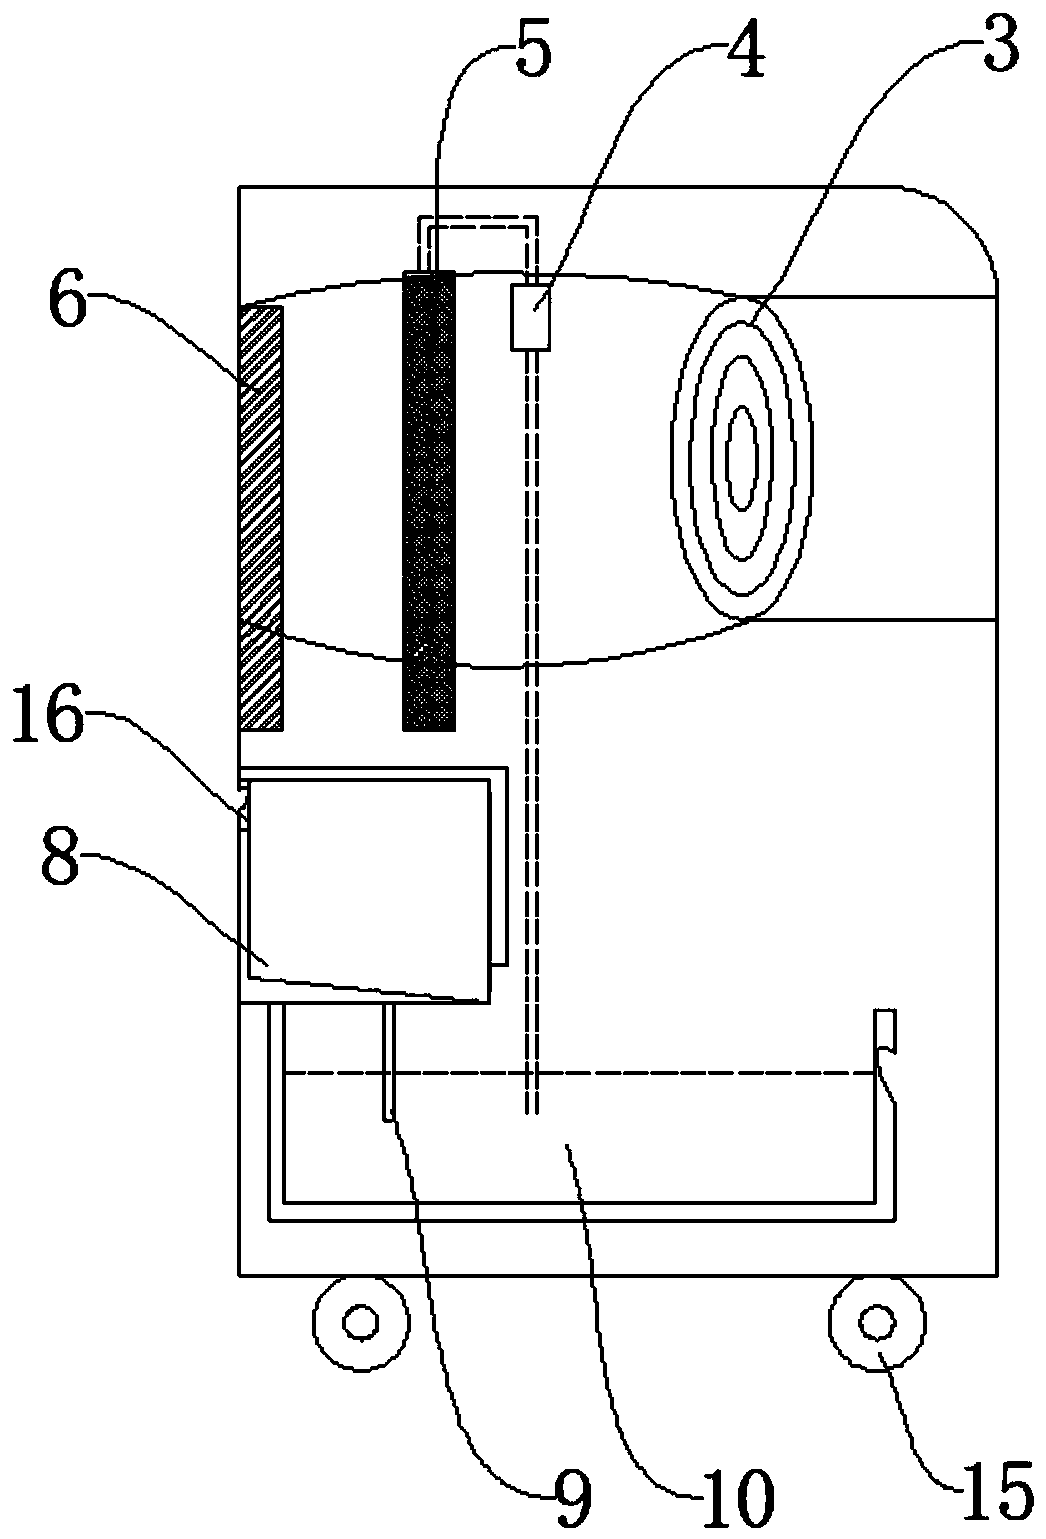 Household intelligent air conditioning fan capable of achieving adjustable temperature control